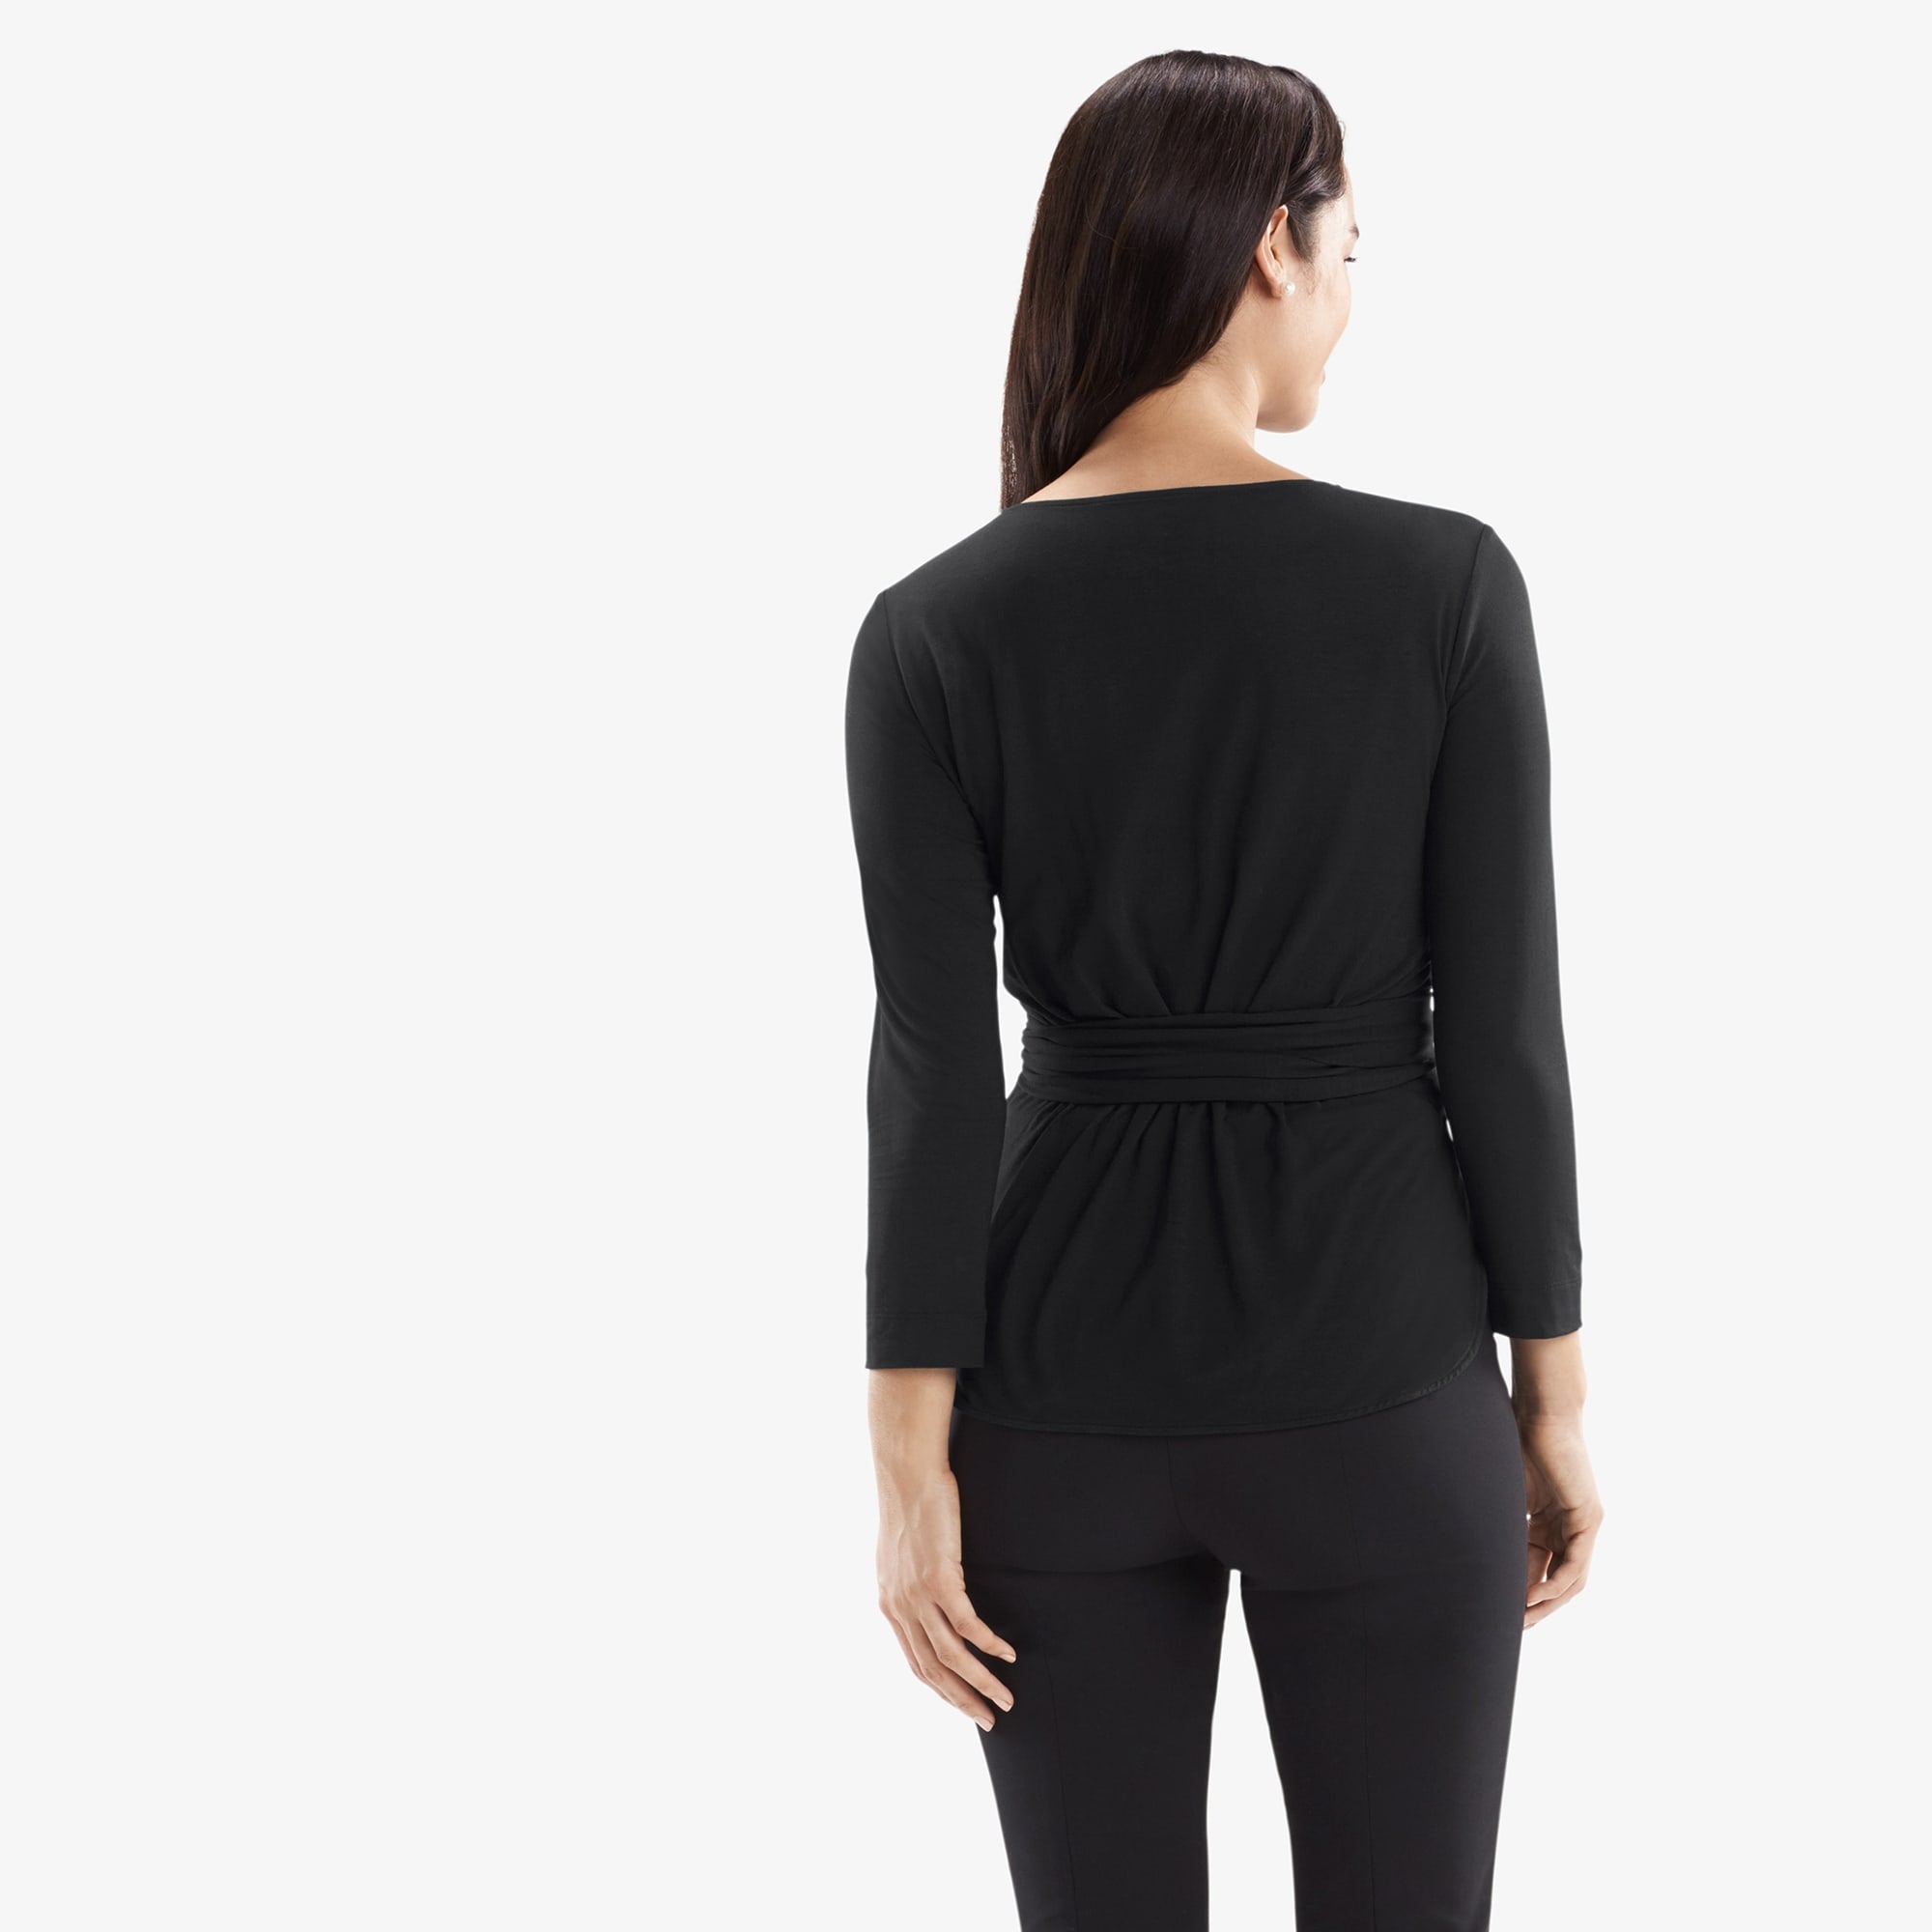 Back image of a woman standing wearing the Walker top knit crepe in Black